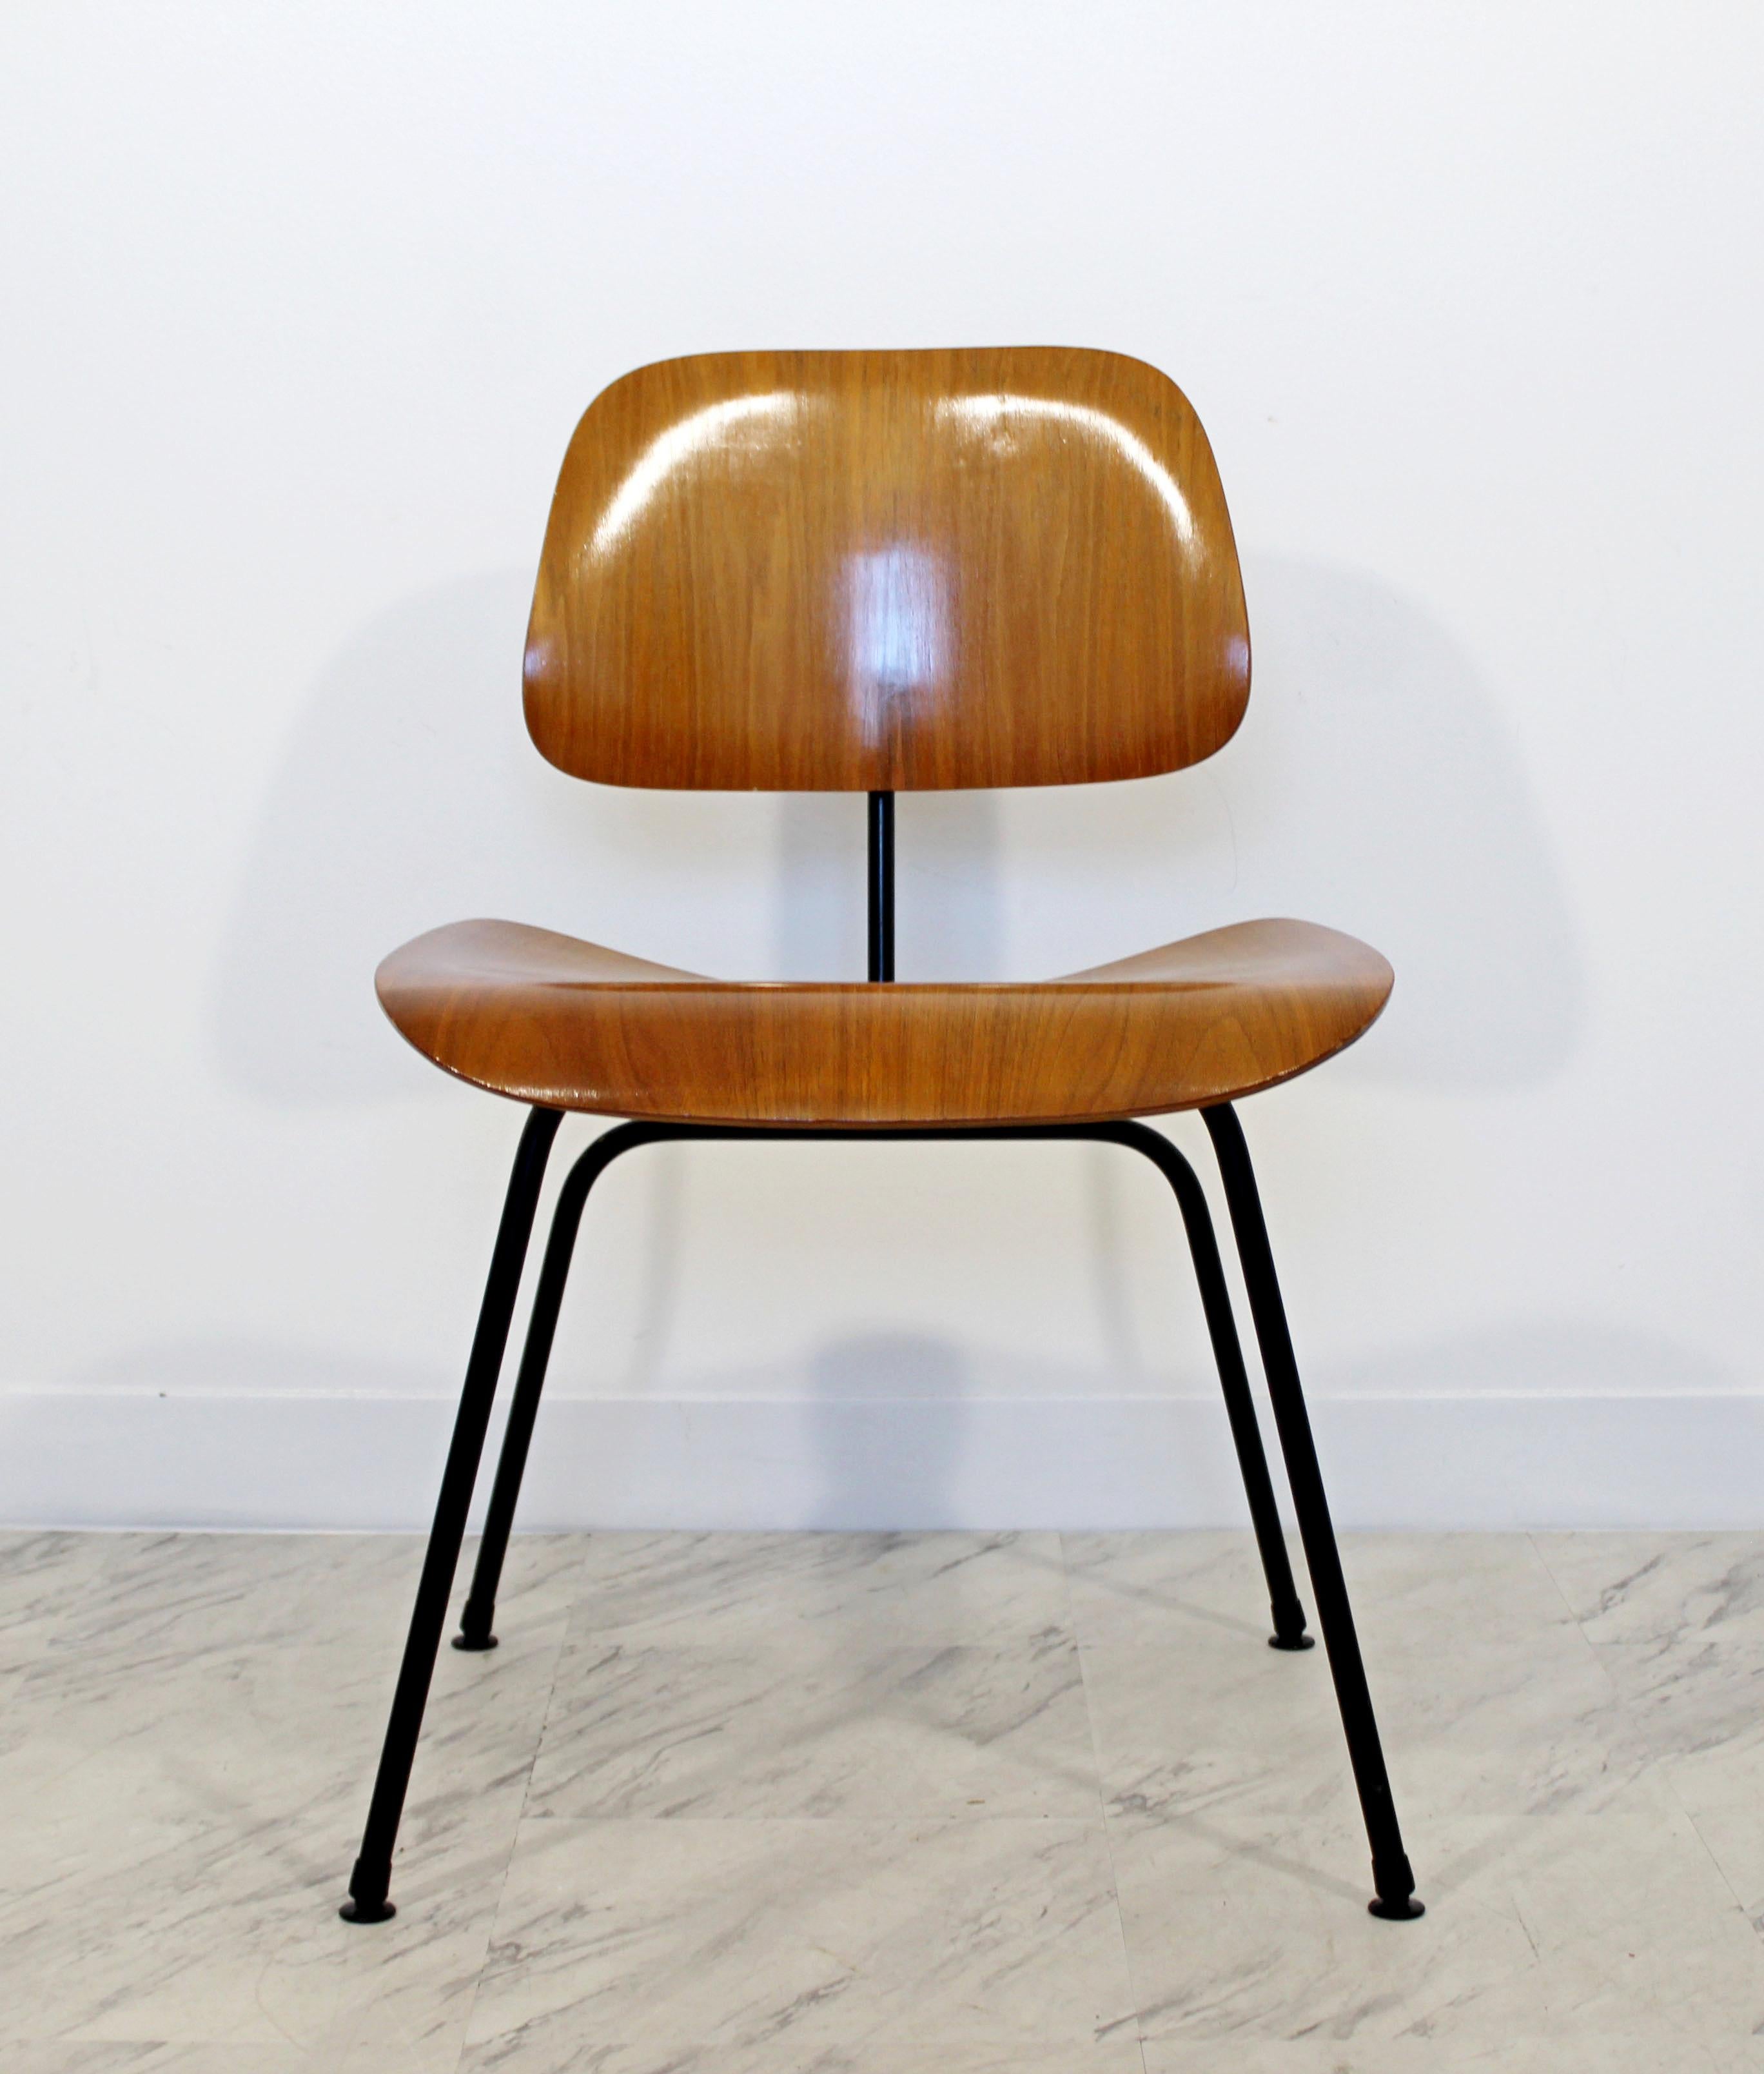 For your consideration is an Iconic DCM lounge desk chair by Ray & Charles Eames for Herman Miller. In excellent condition. The dimensions are 19.5